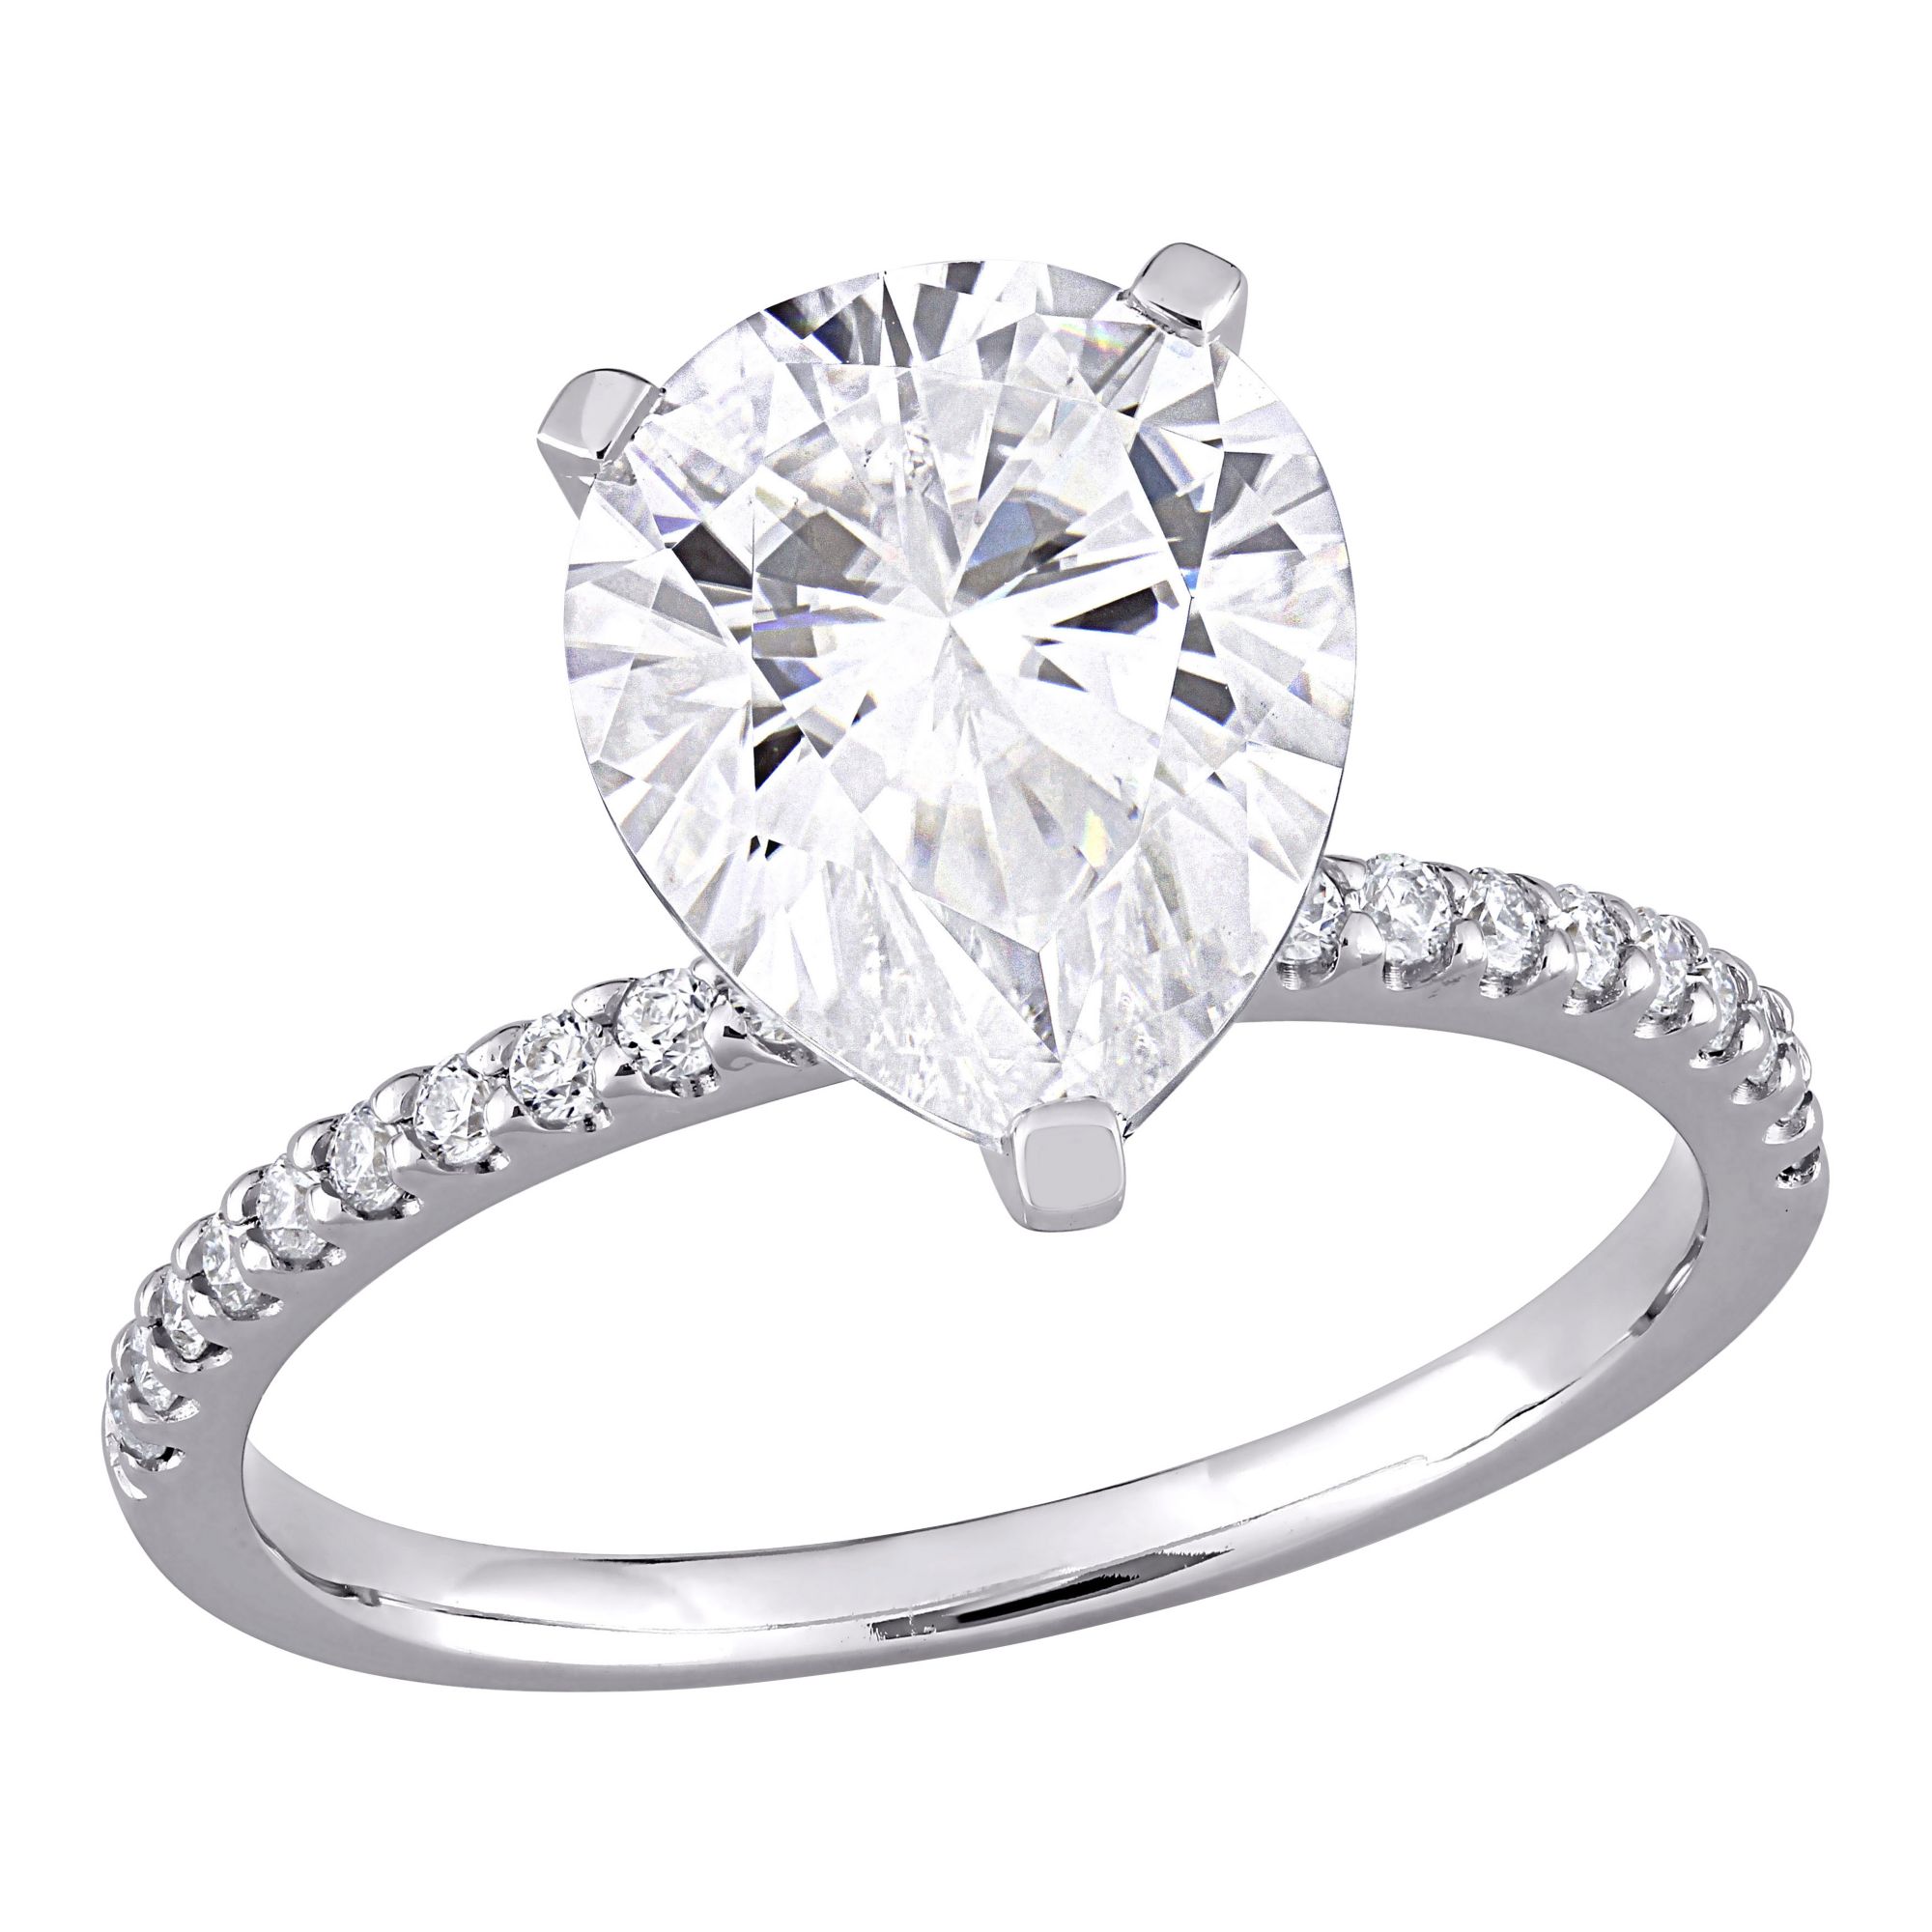 3.5 ct. DEW Created Moissanite Pear Shape Engagement Ring in 10k White Gold - Size 9